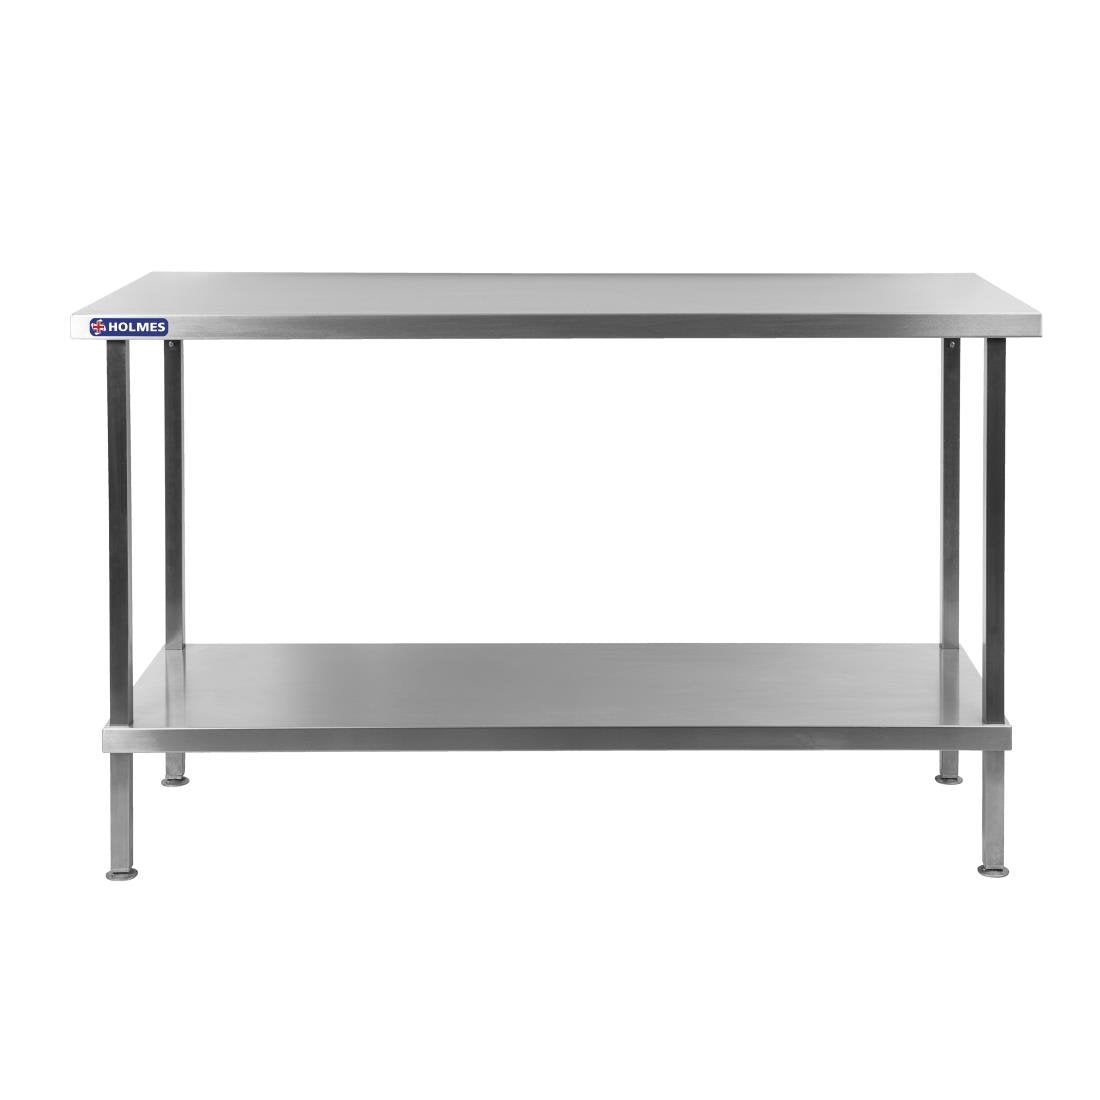 DR054 Holmes Stainless Steel Centre Table 600mm JD Catering Equipment Solutions Ltd